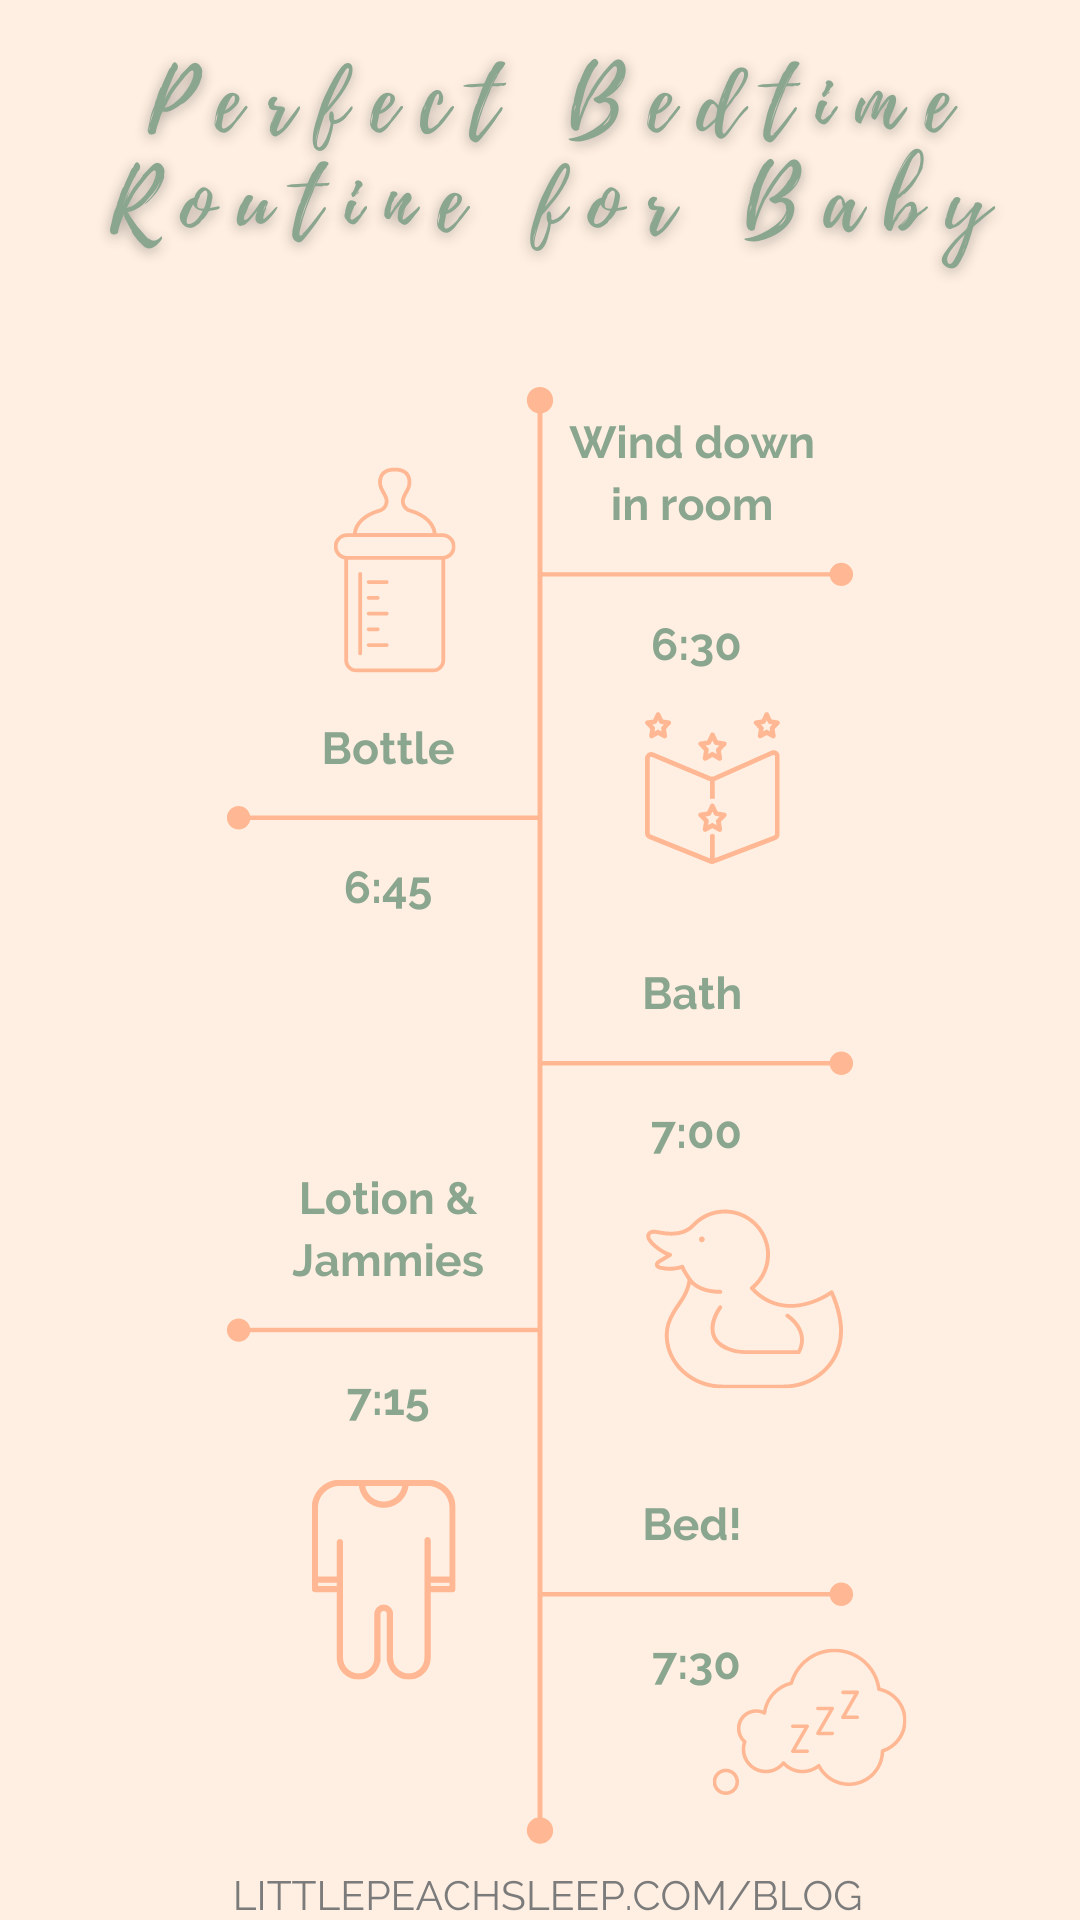 bedtime routine for baby timeline